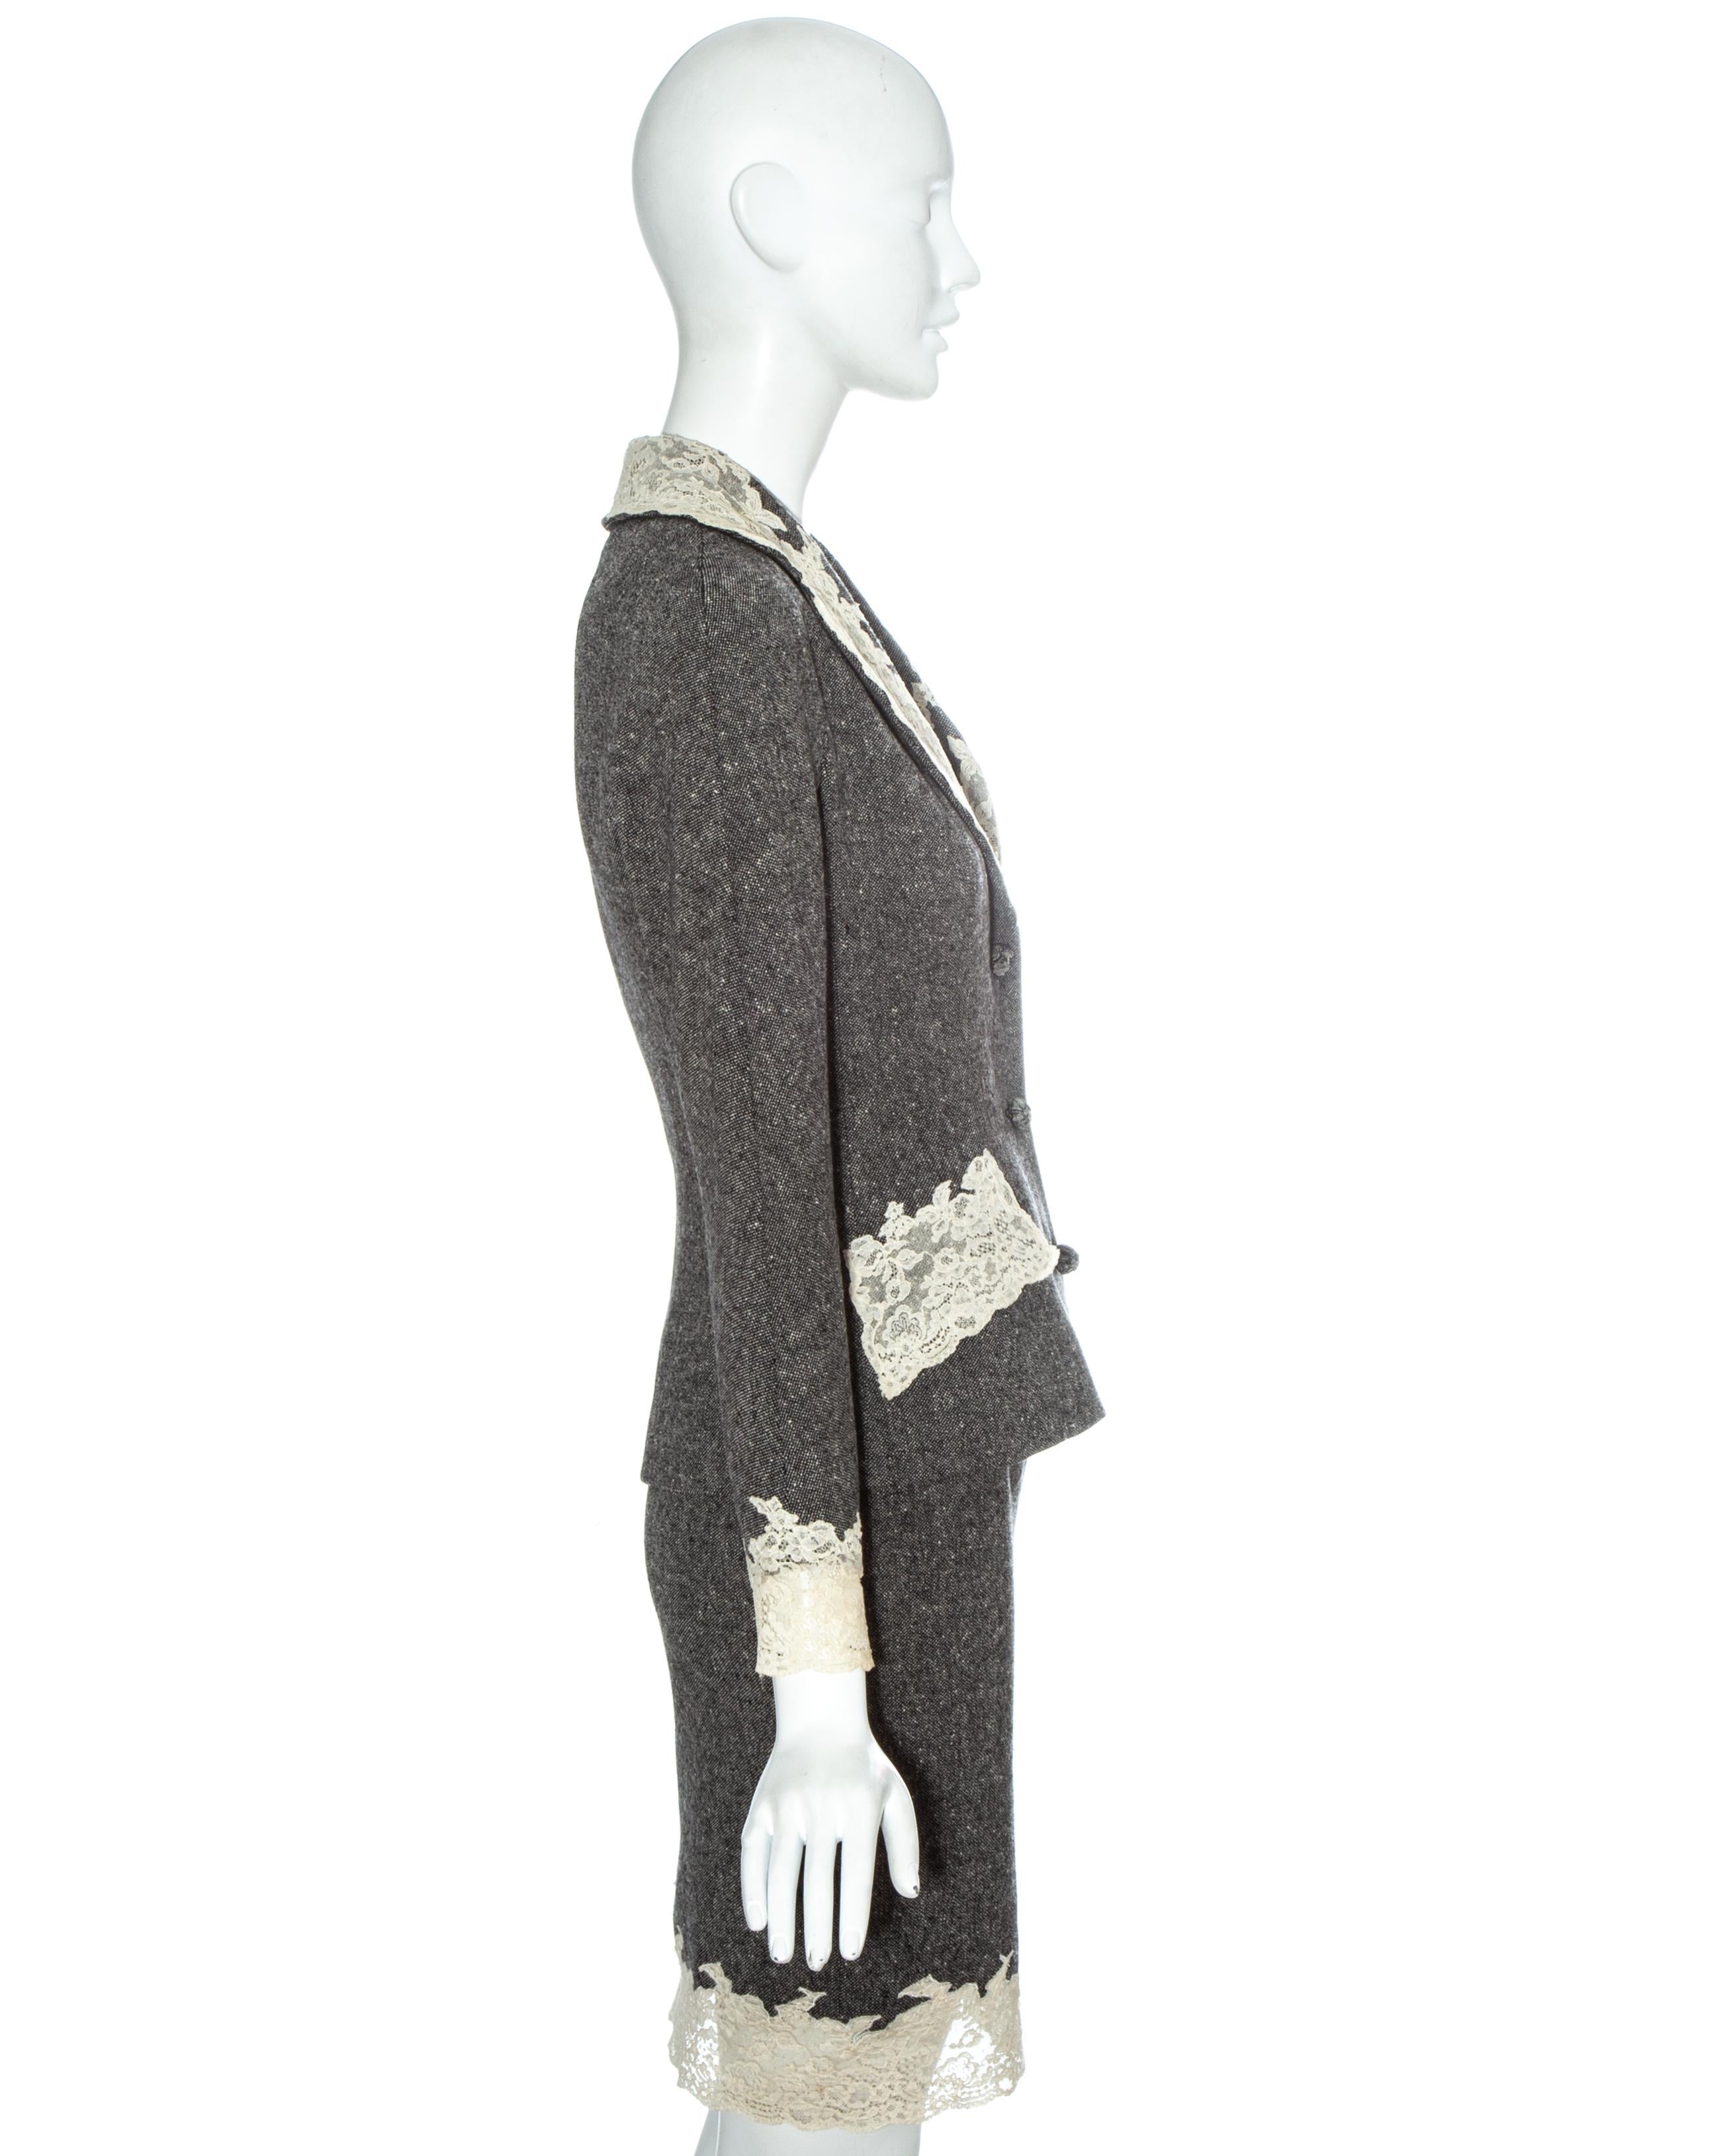 Gray Christian Dior grey Donegal tweed skirt suit edged in white Calais lace, fw 1998